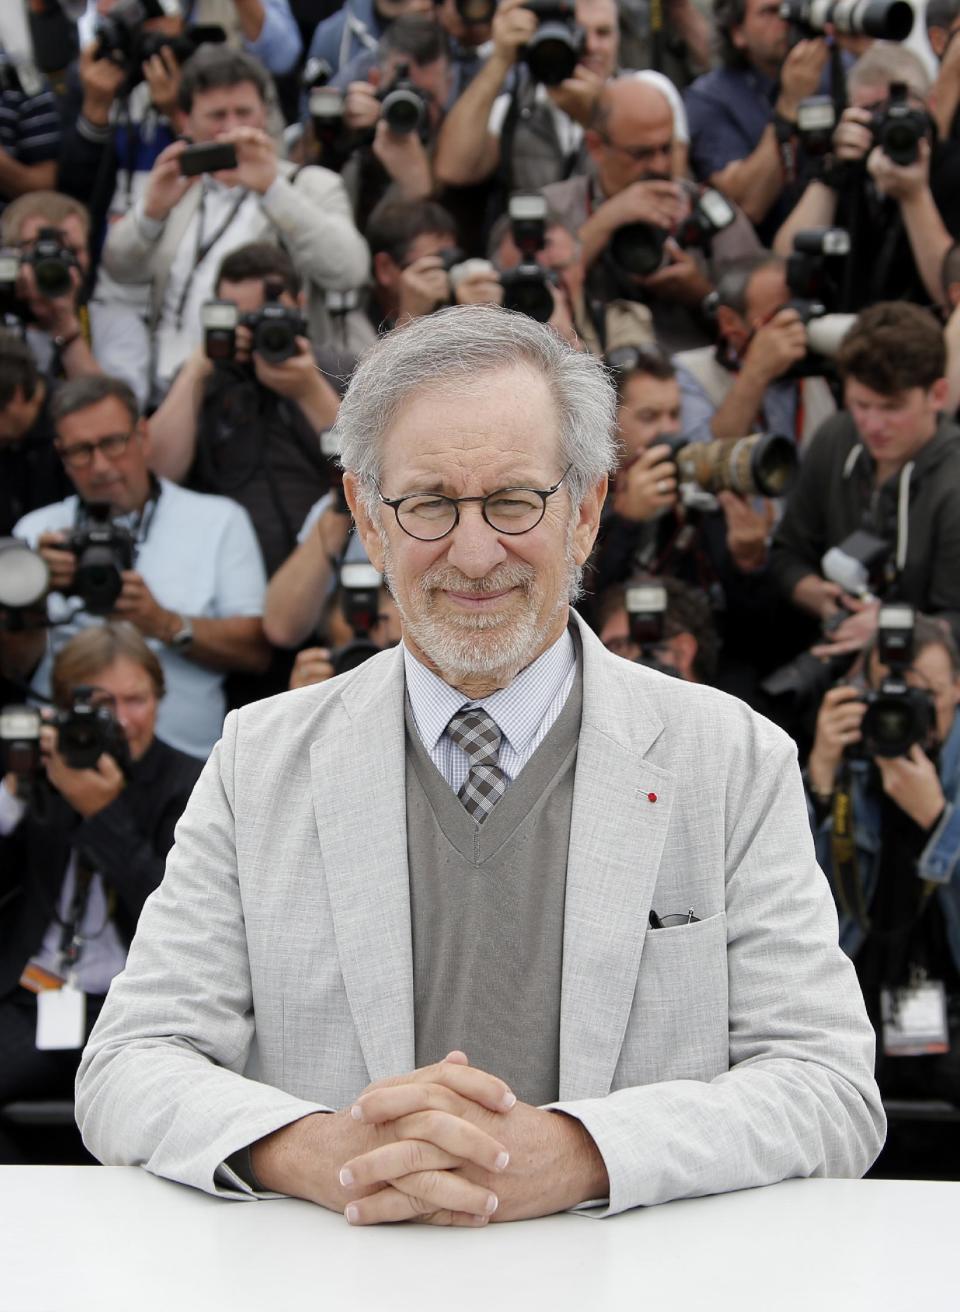 Jury president Steven Spielberg poses for photographers during a photo call for the jury at the 66th international film festival, in Cannes, southern France, Wednesday, May 15, 2013. (AP Photo/Francois Mori)